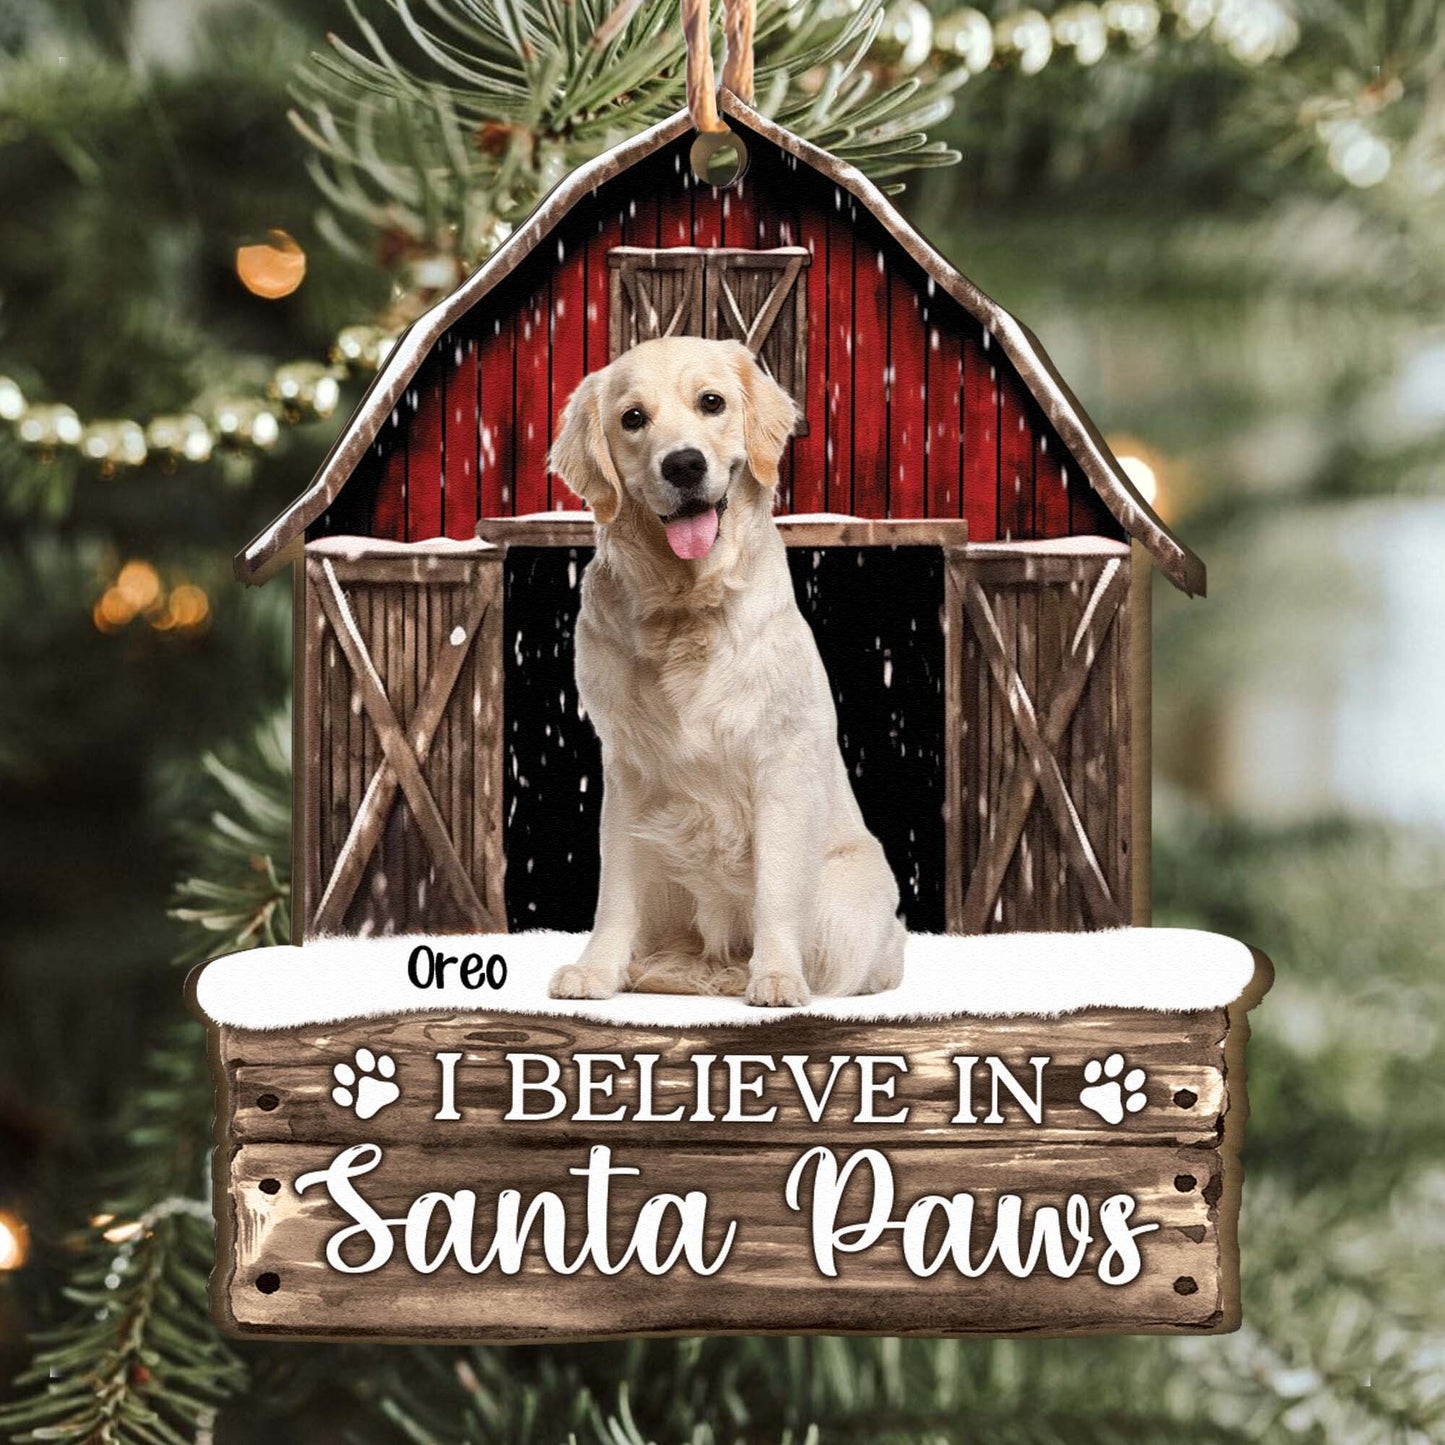 Have Yourself A Furry Little Christmas Pet Dog Cat - Personalized Wooden Ornament